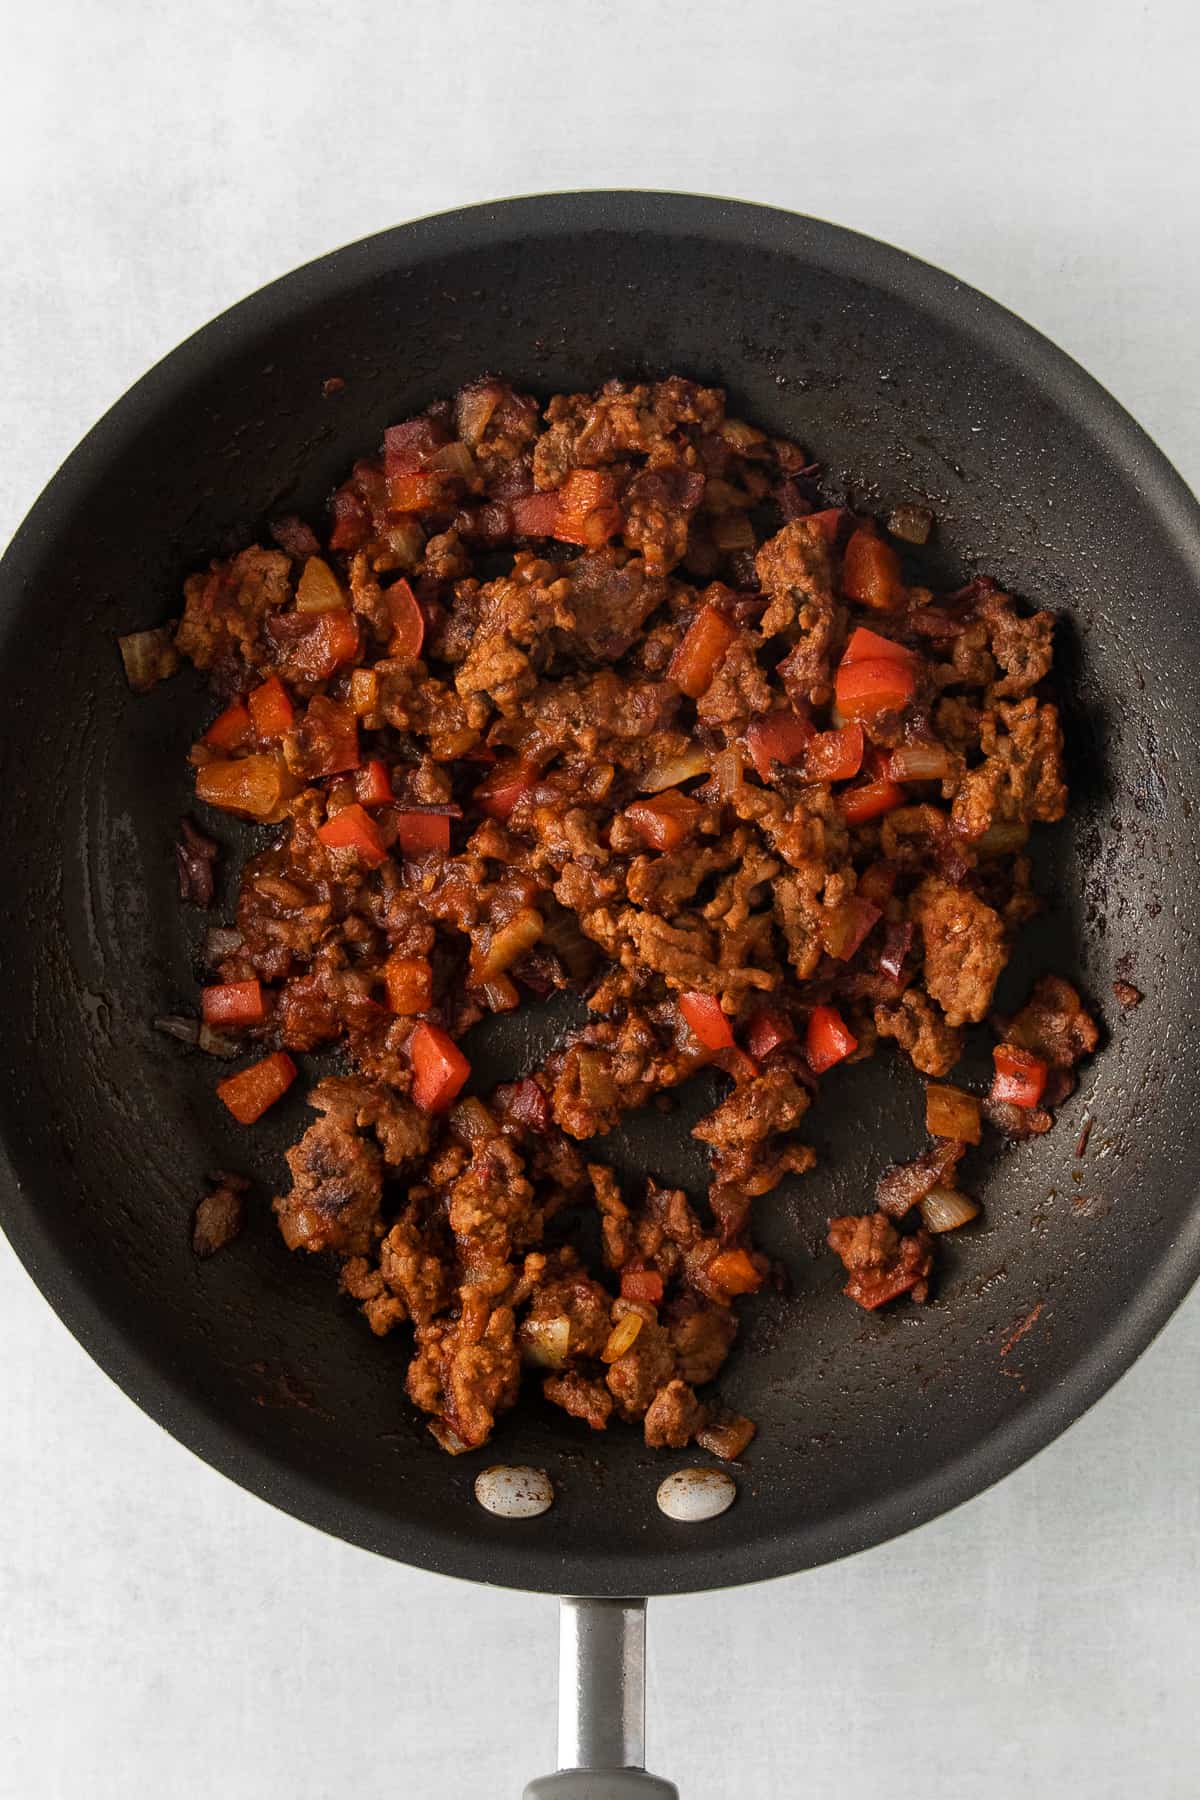 Ground beef and peppers in a skillet.